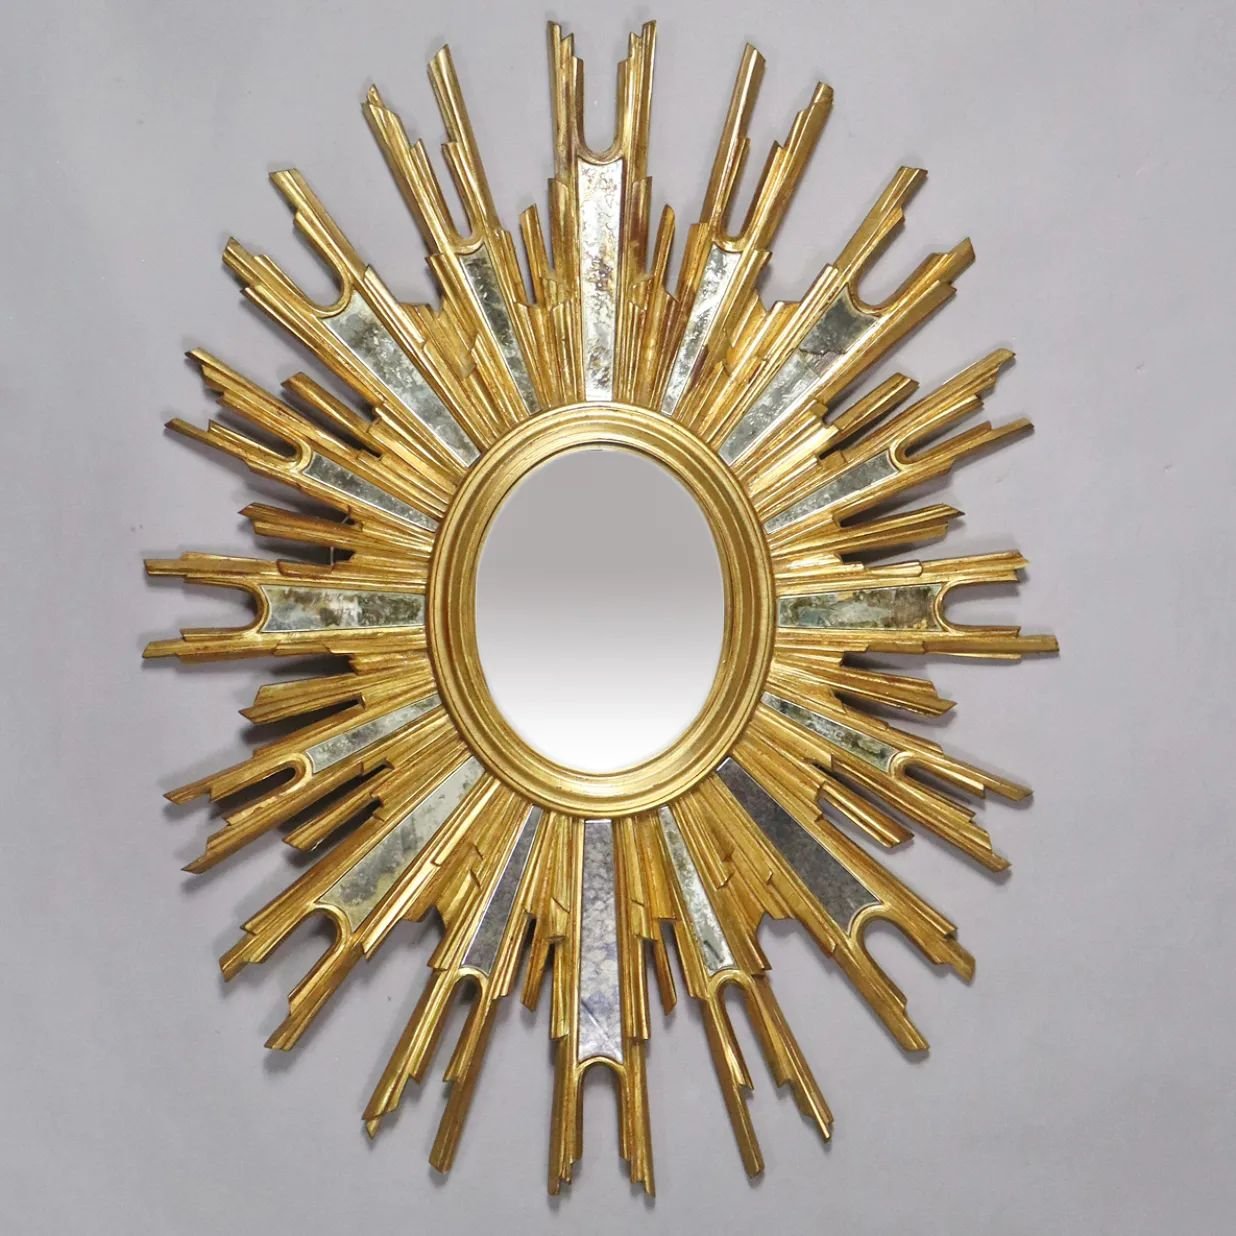 Sunny.. 🌞 

A chic 1970s Belgian sunburst convex mirror, with distressed radial plates

Included in our 28th May Fine Art &amp; Antiques Sale

.

.

.

.

.

.

.

.

#antiques #interiors #interiordesign #auction #sunburst #mirror #mirrors #sunburst